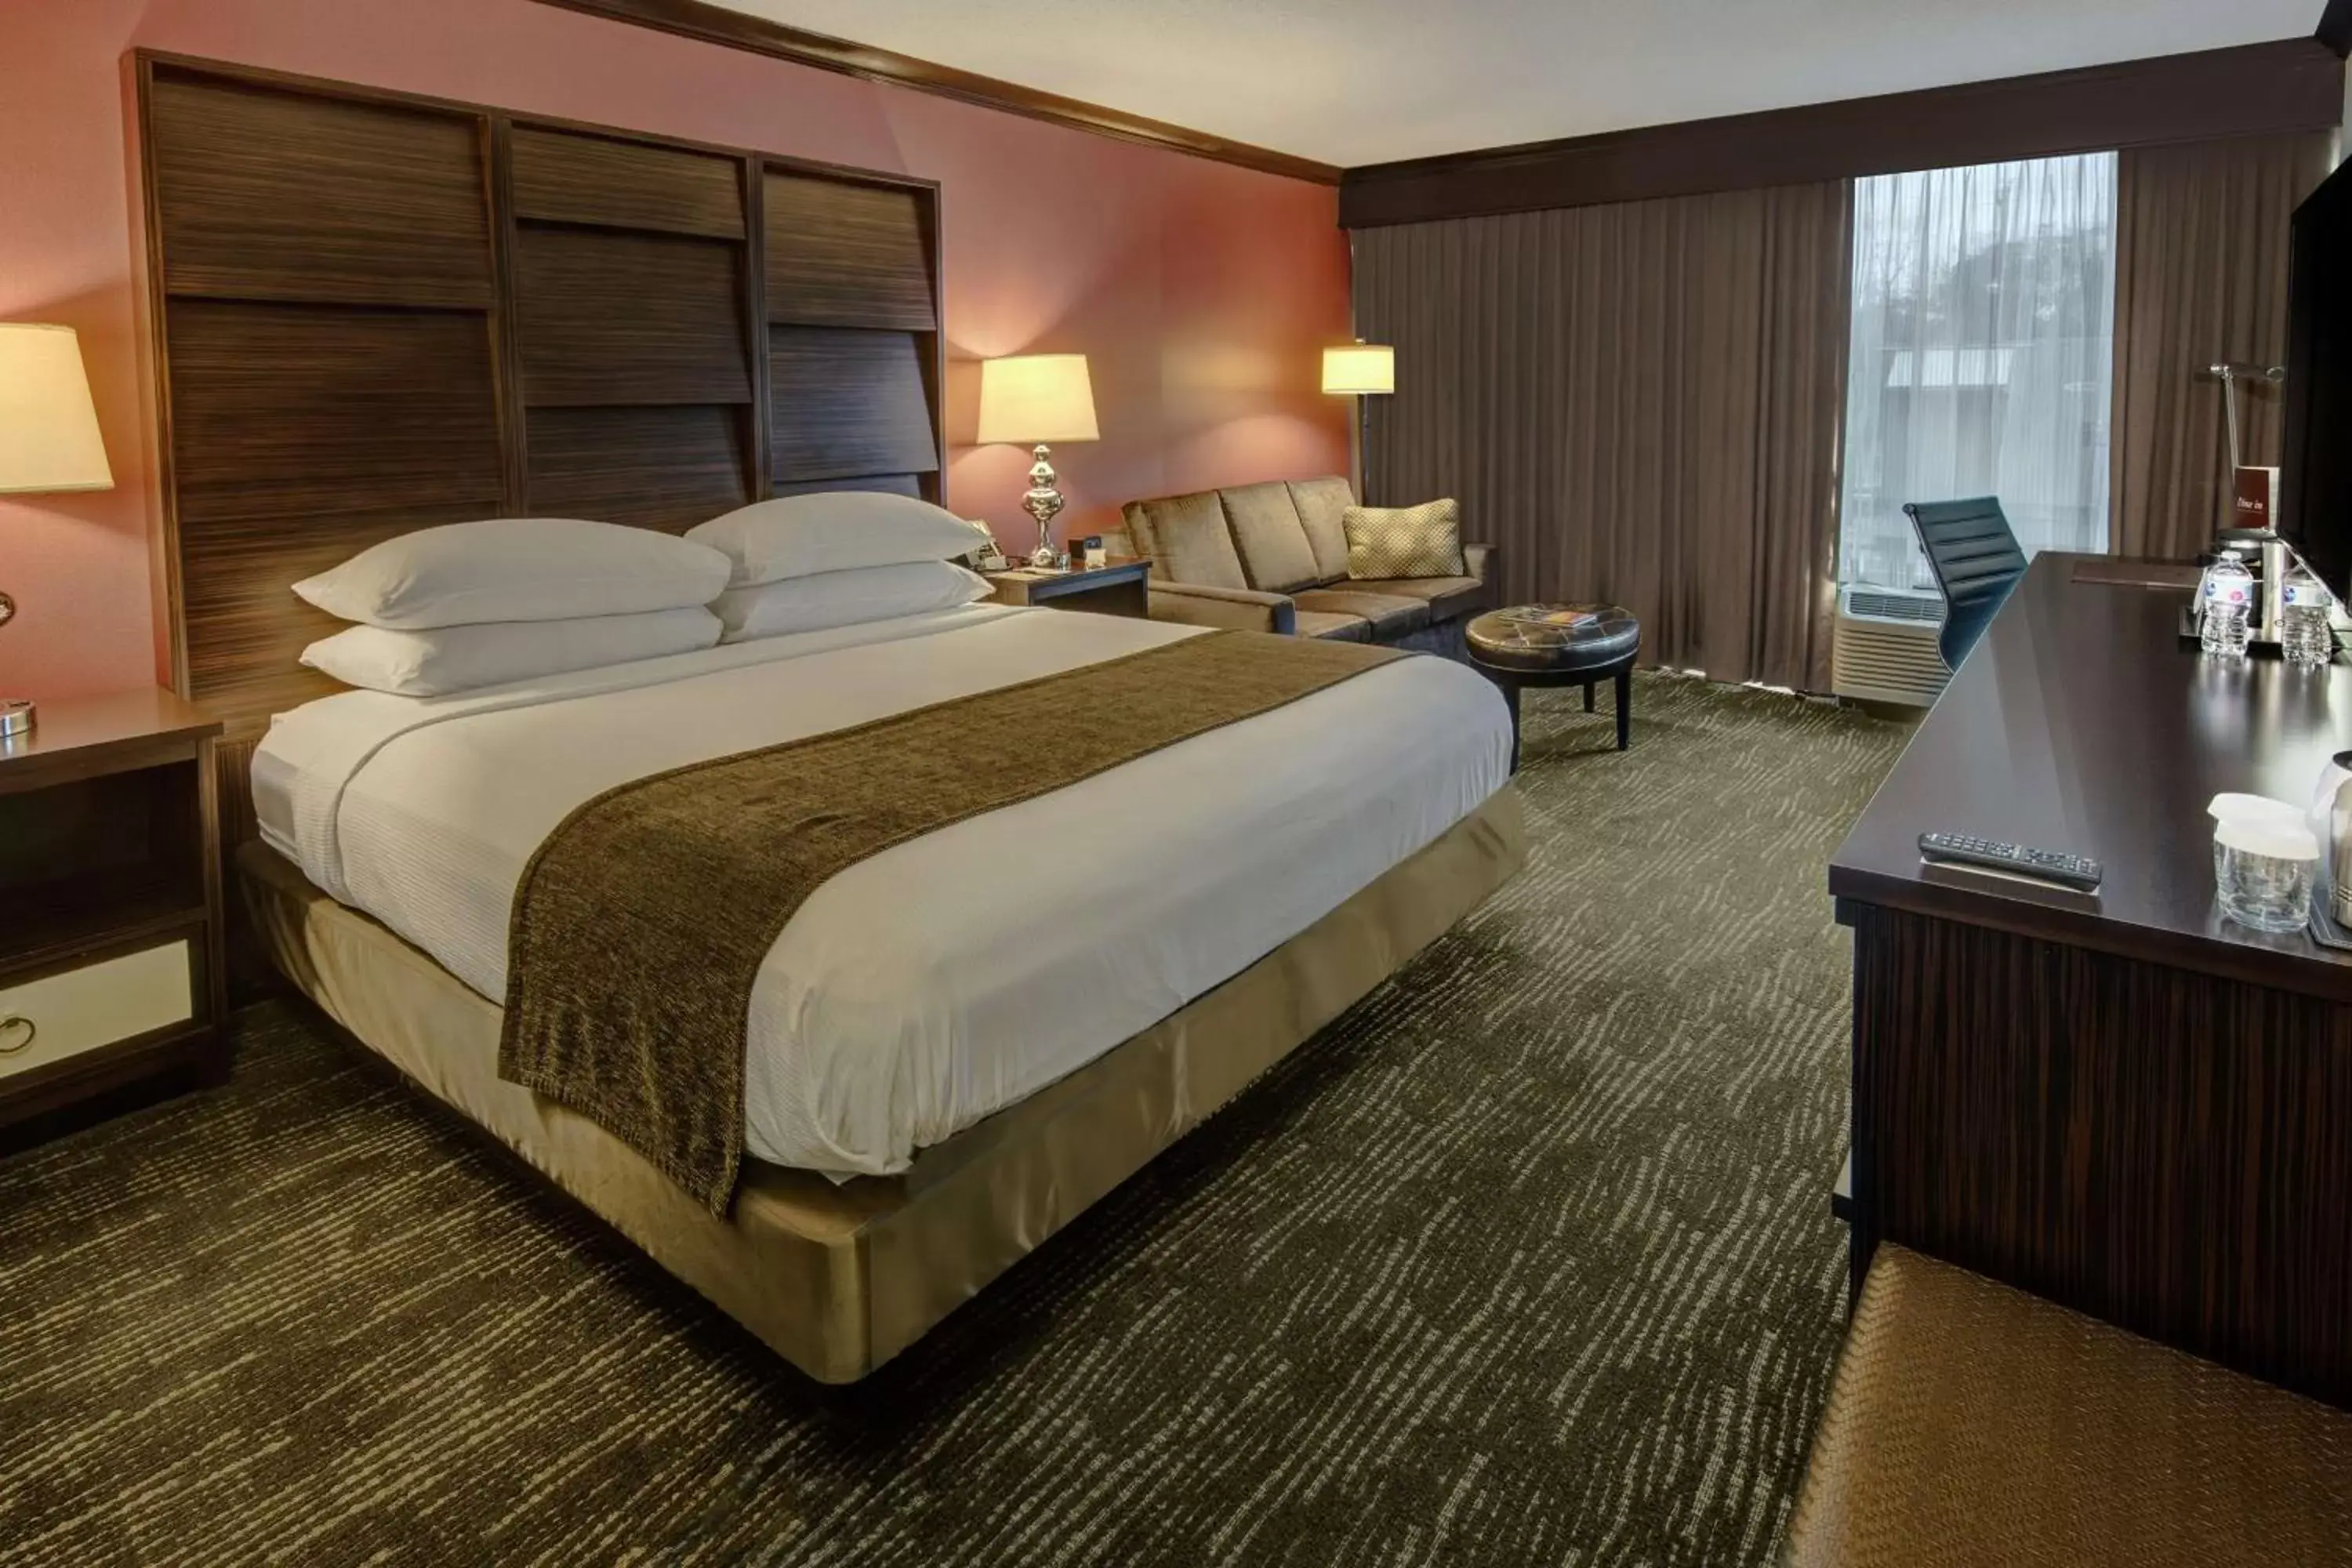 King Room with Sofa Bed in DoubleTree by Hilton Decatur Riverfront